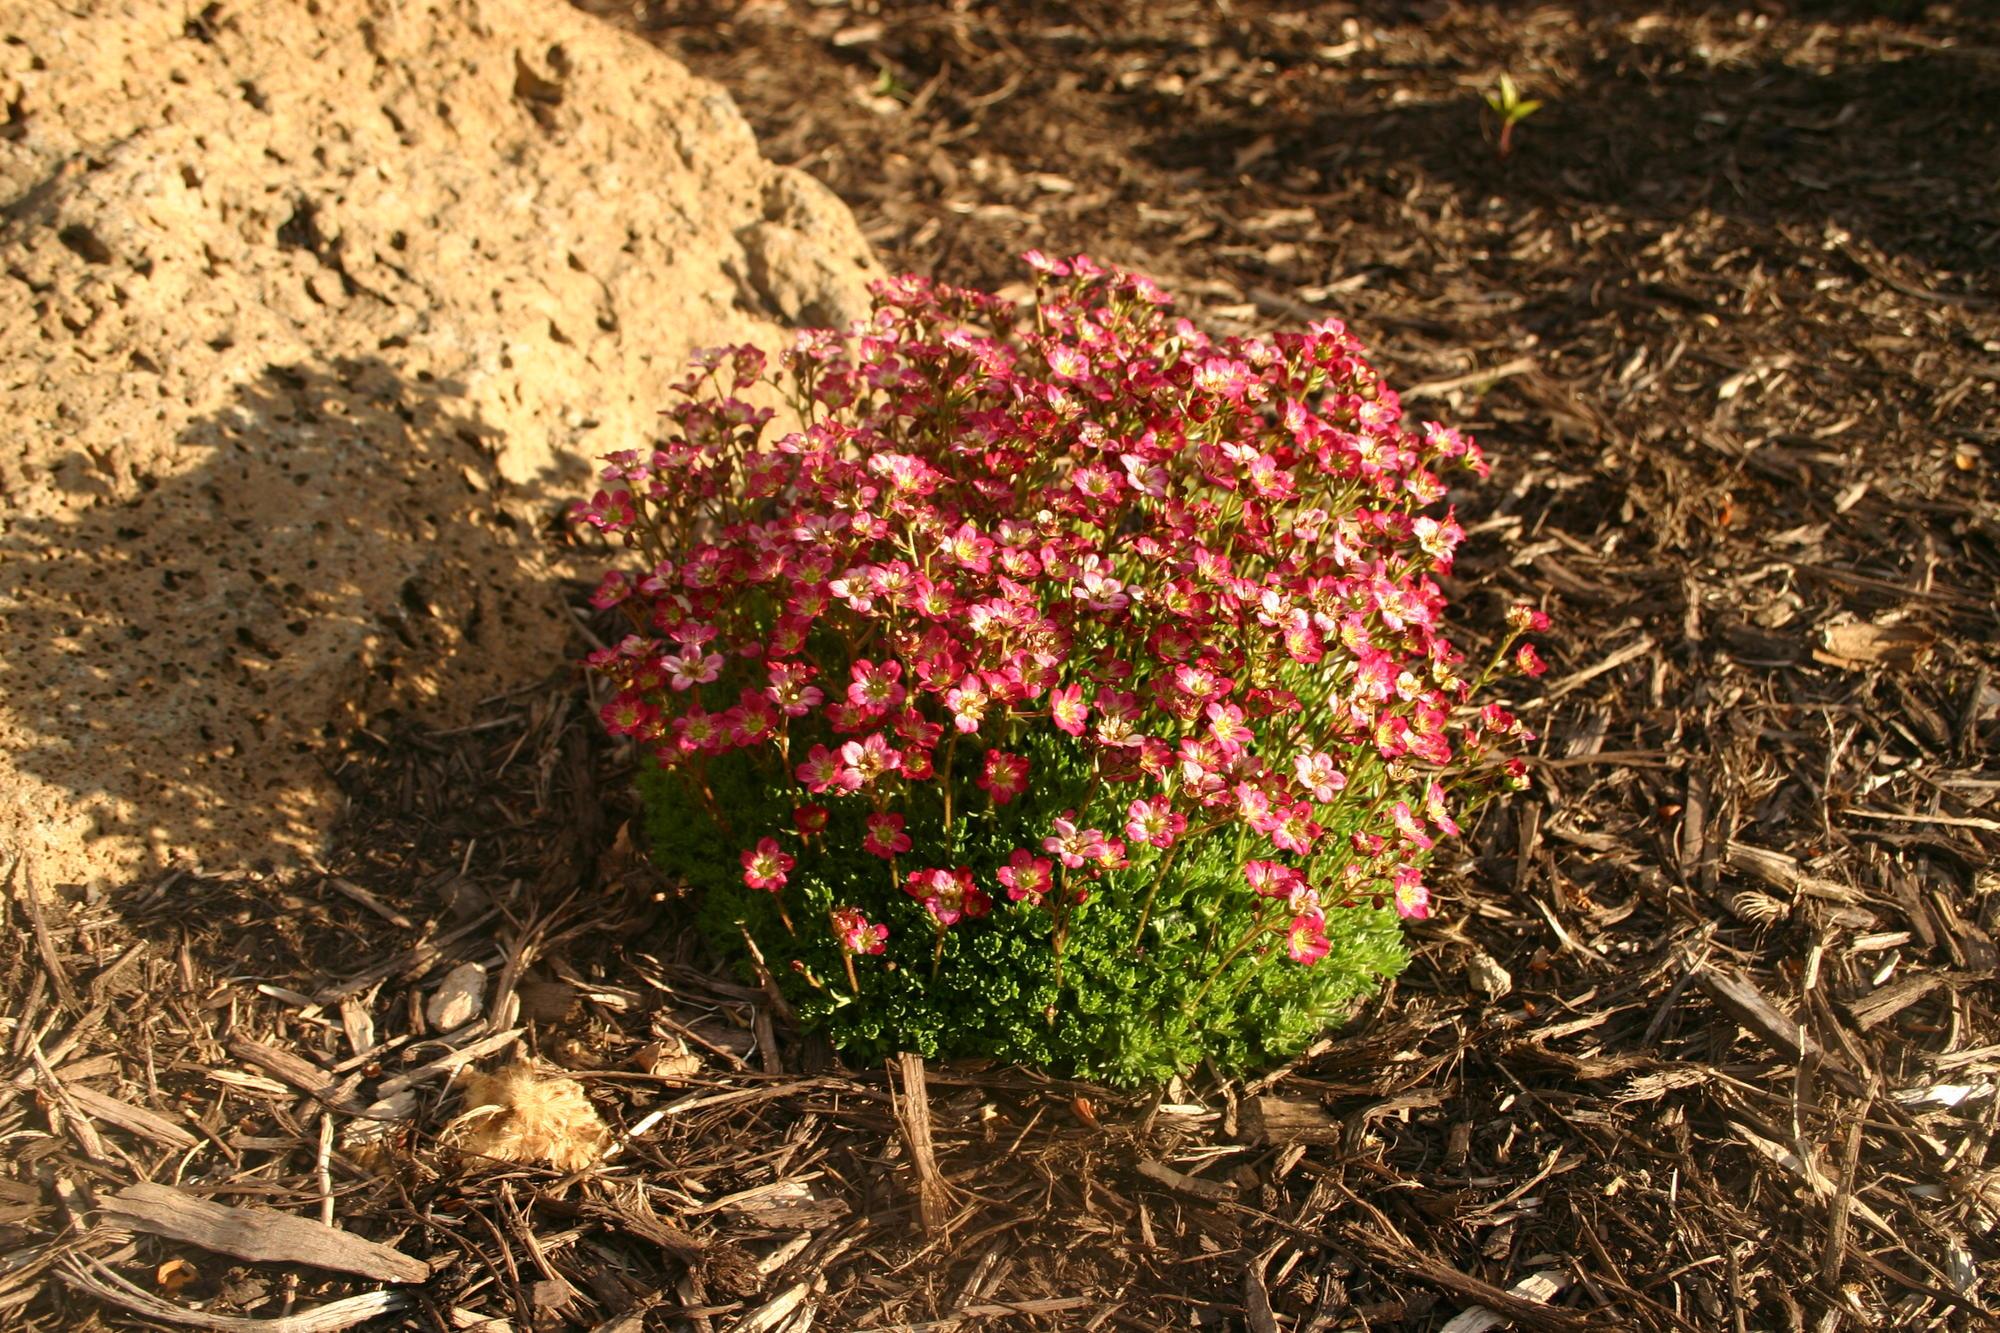 A mossy saxifrage with pink blooms.